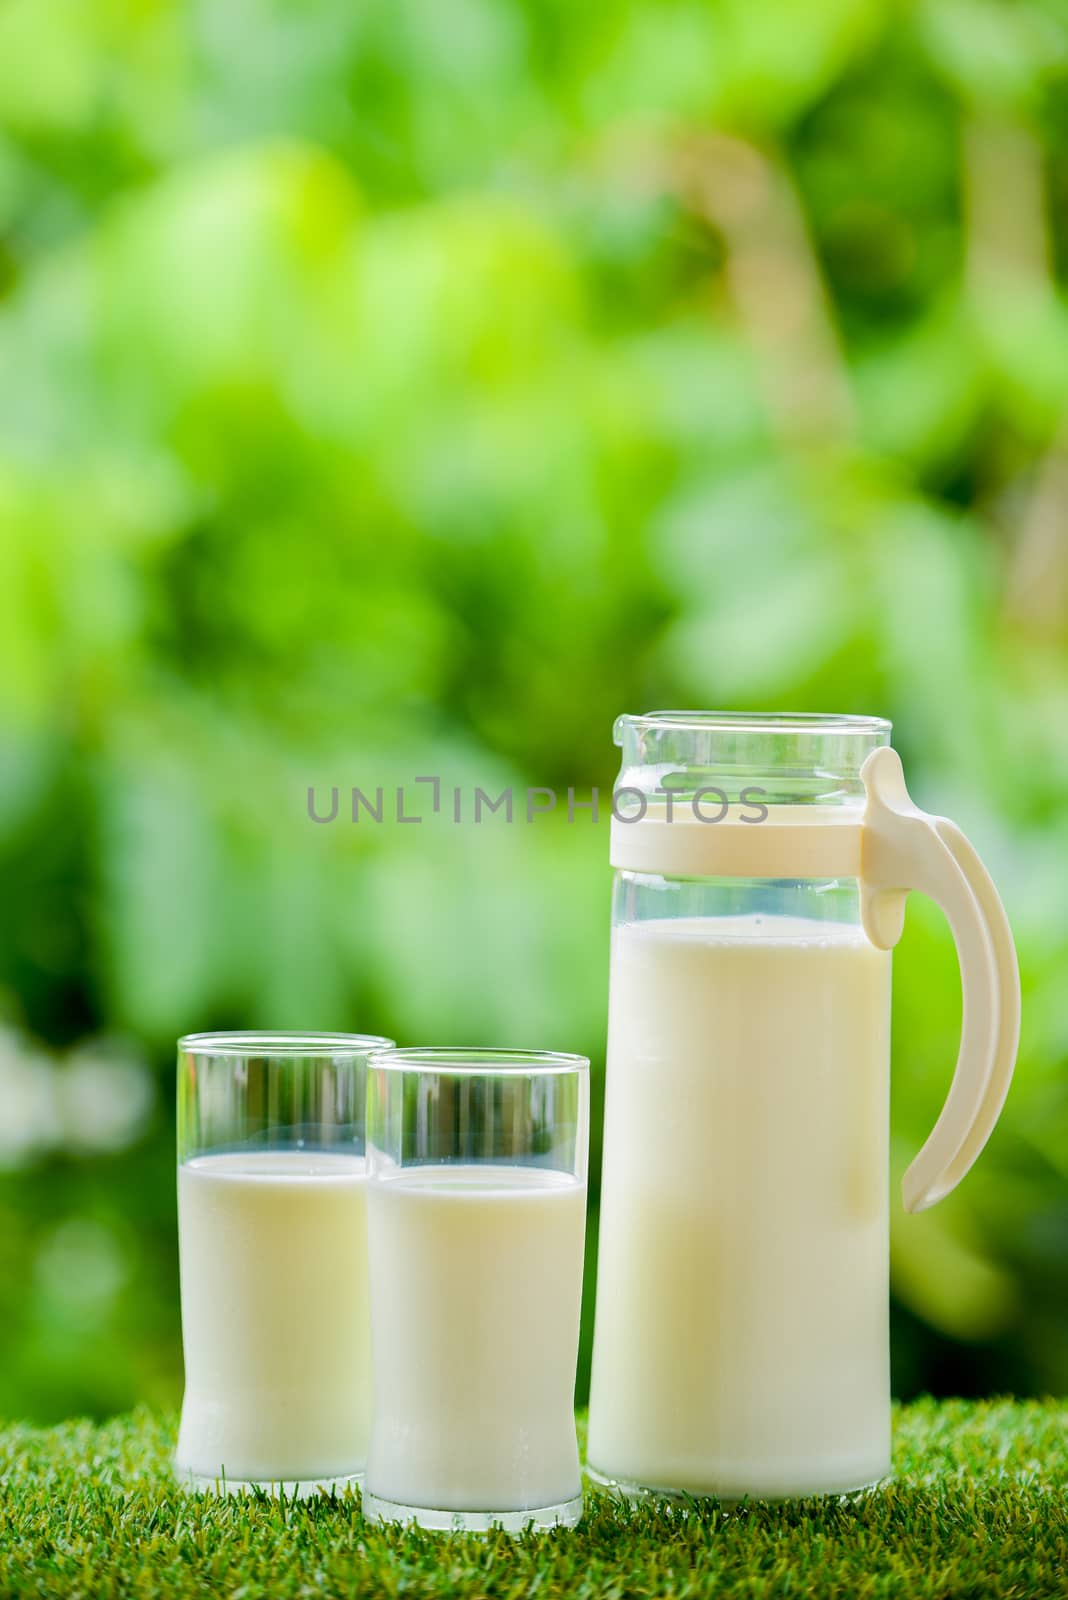 milk jug with glass on grass with nature background